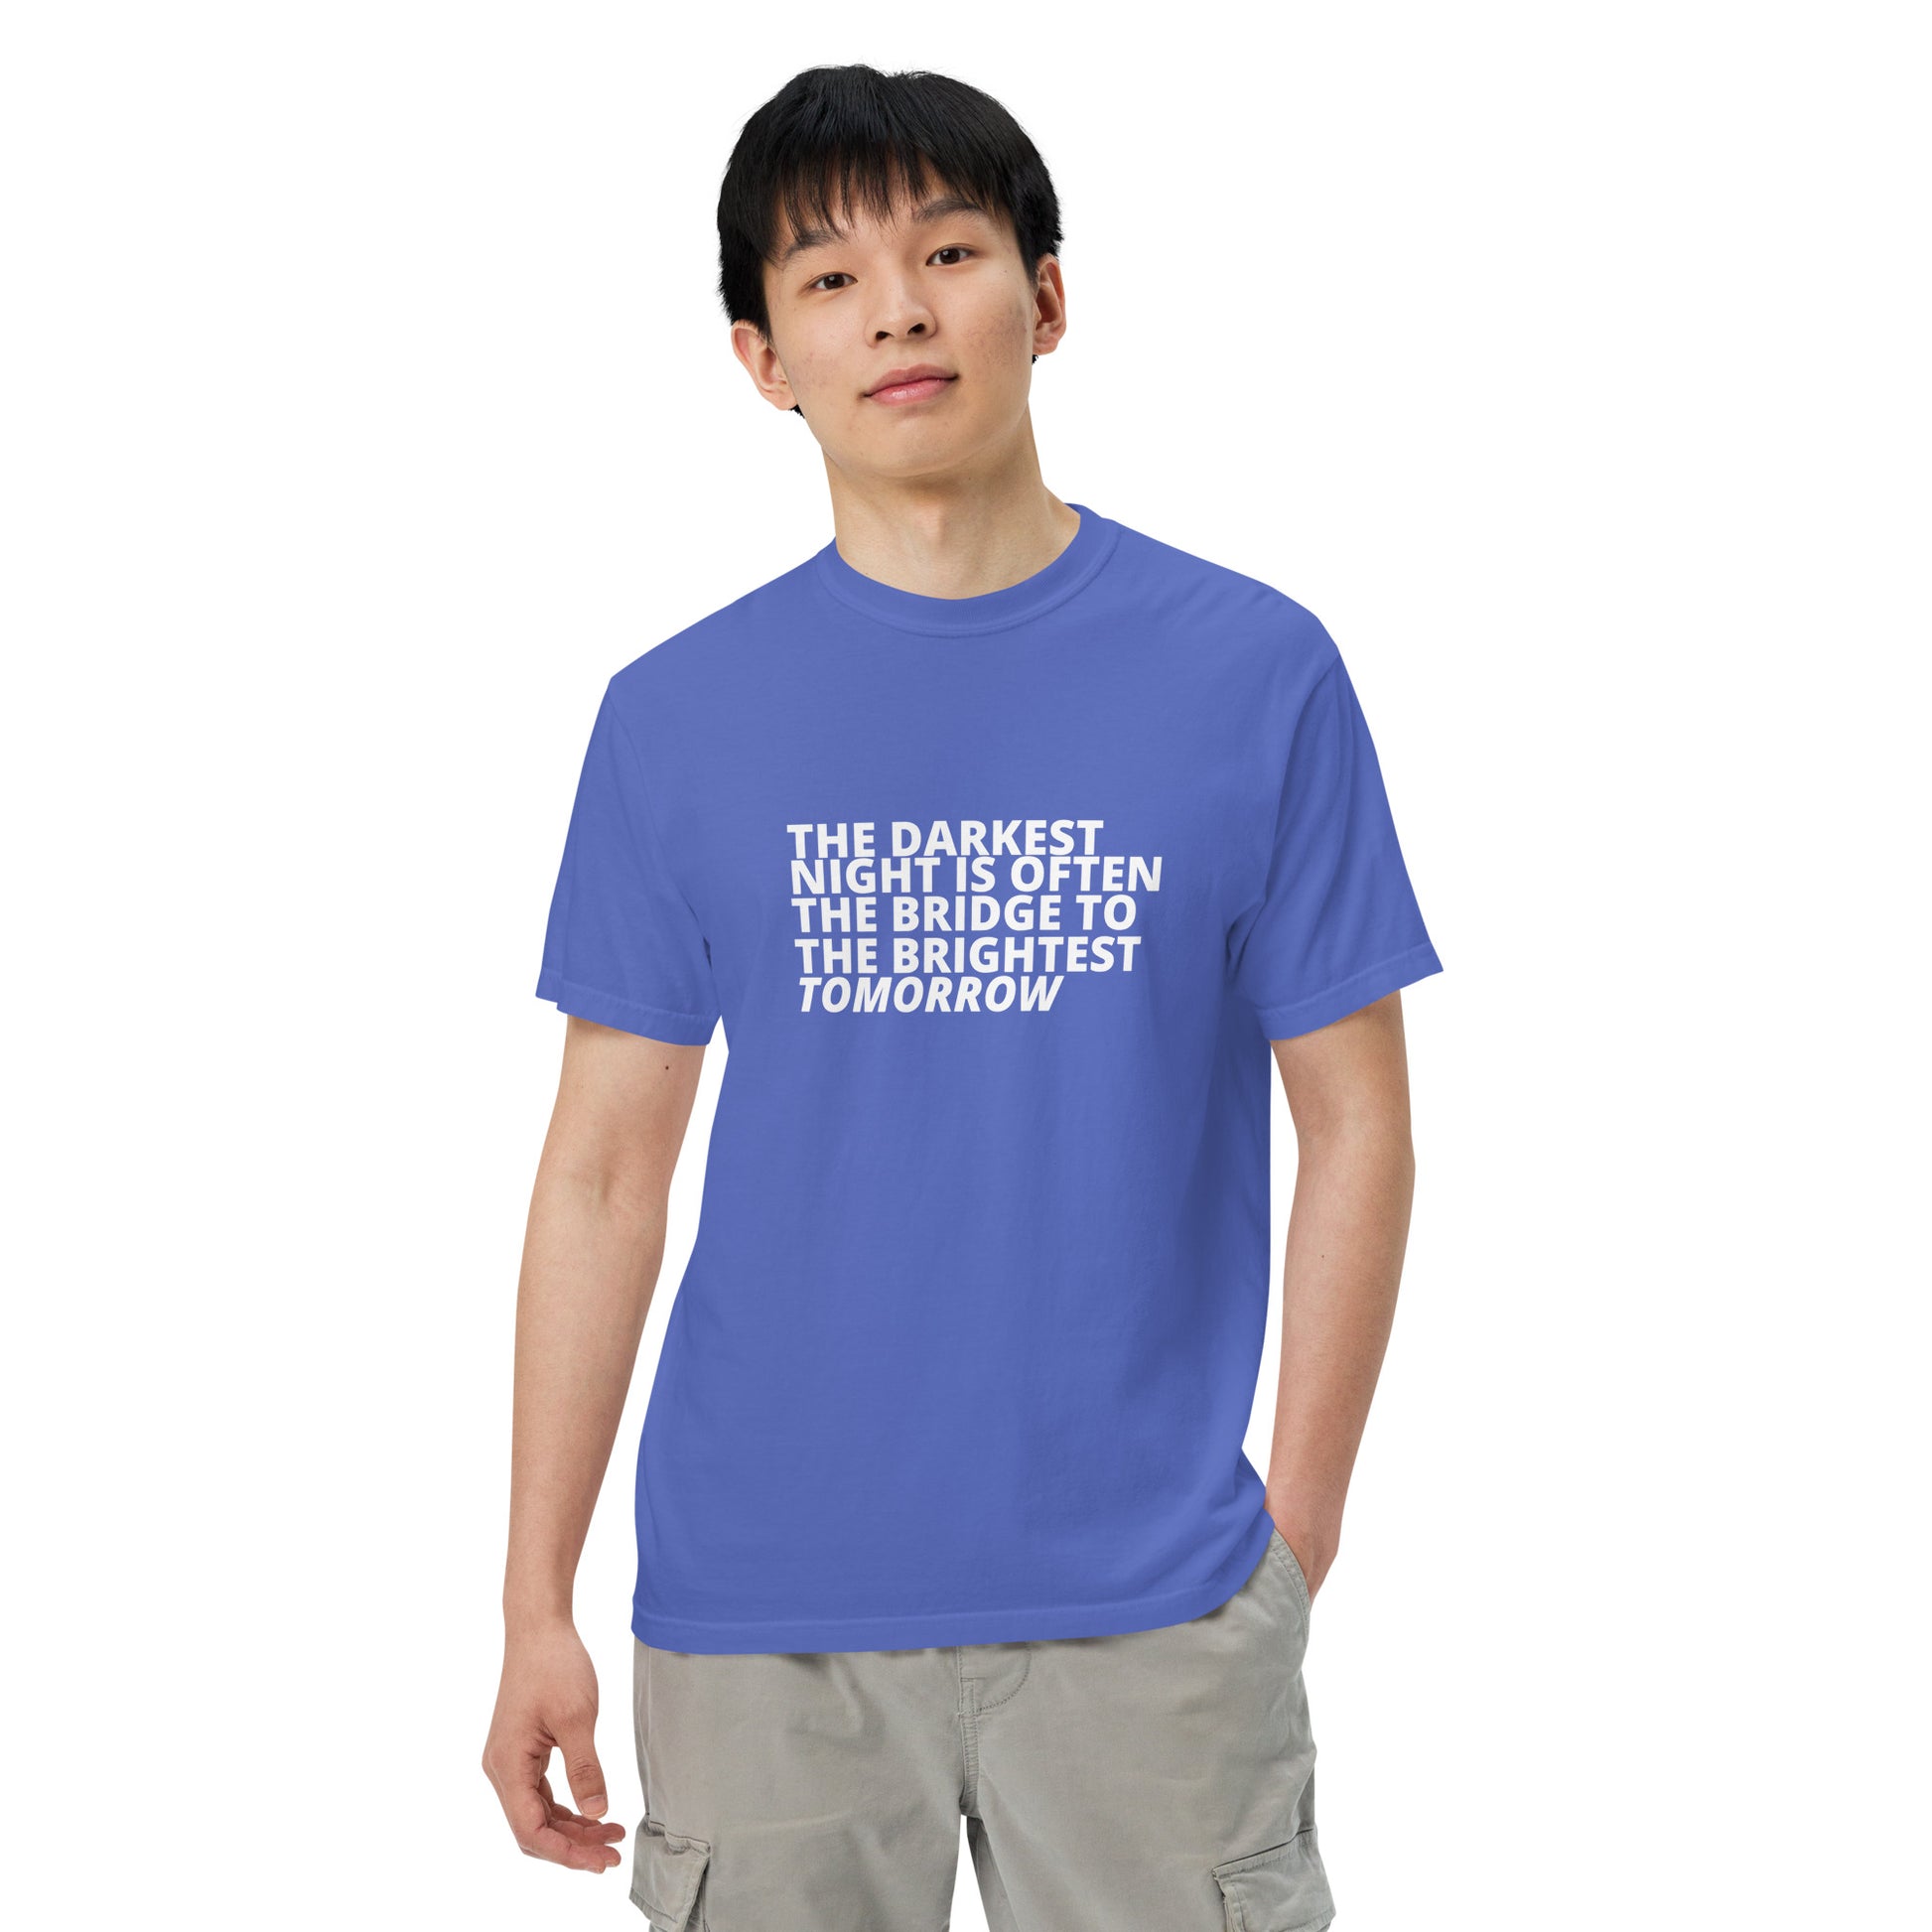 The HOPE FOR TOMORROW Men's Garment-Dyed Heavyweight T-shirt